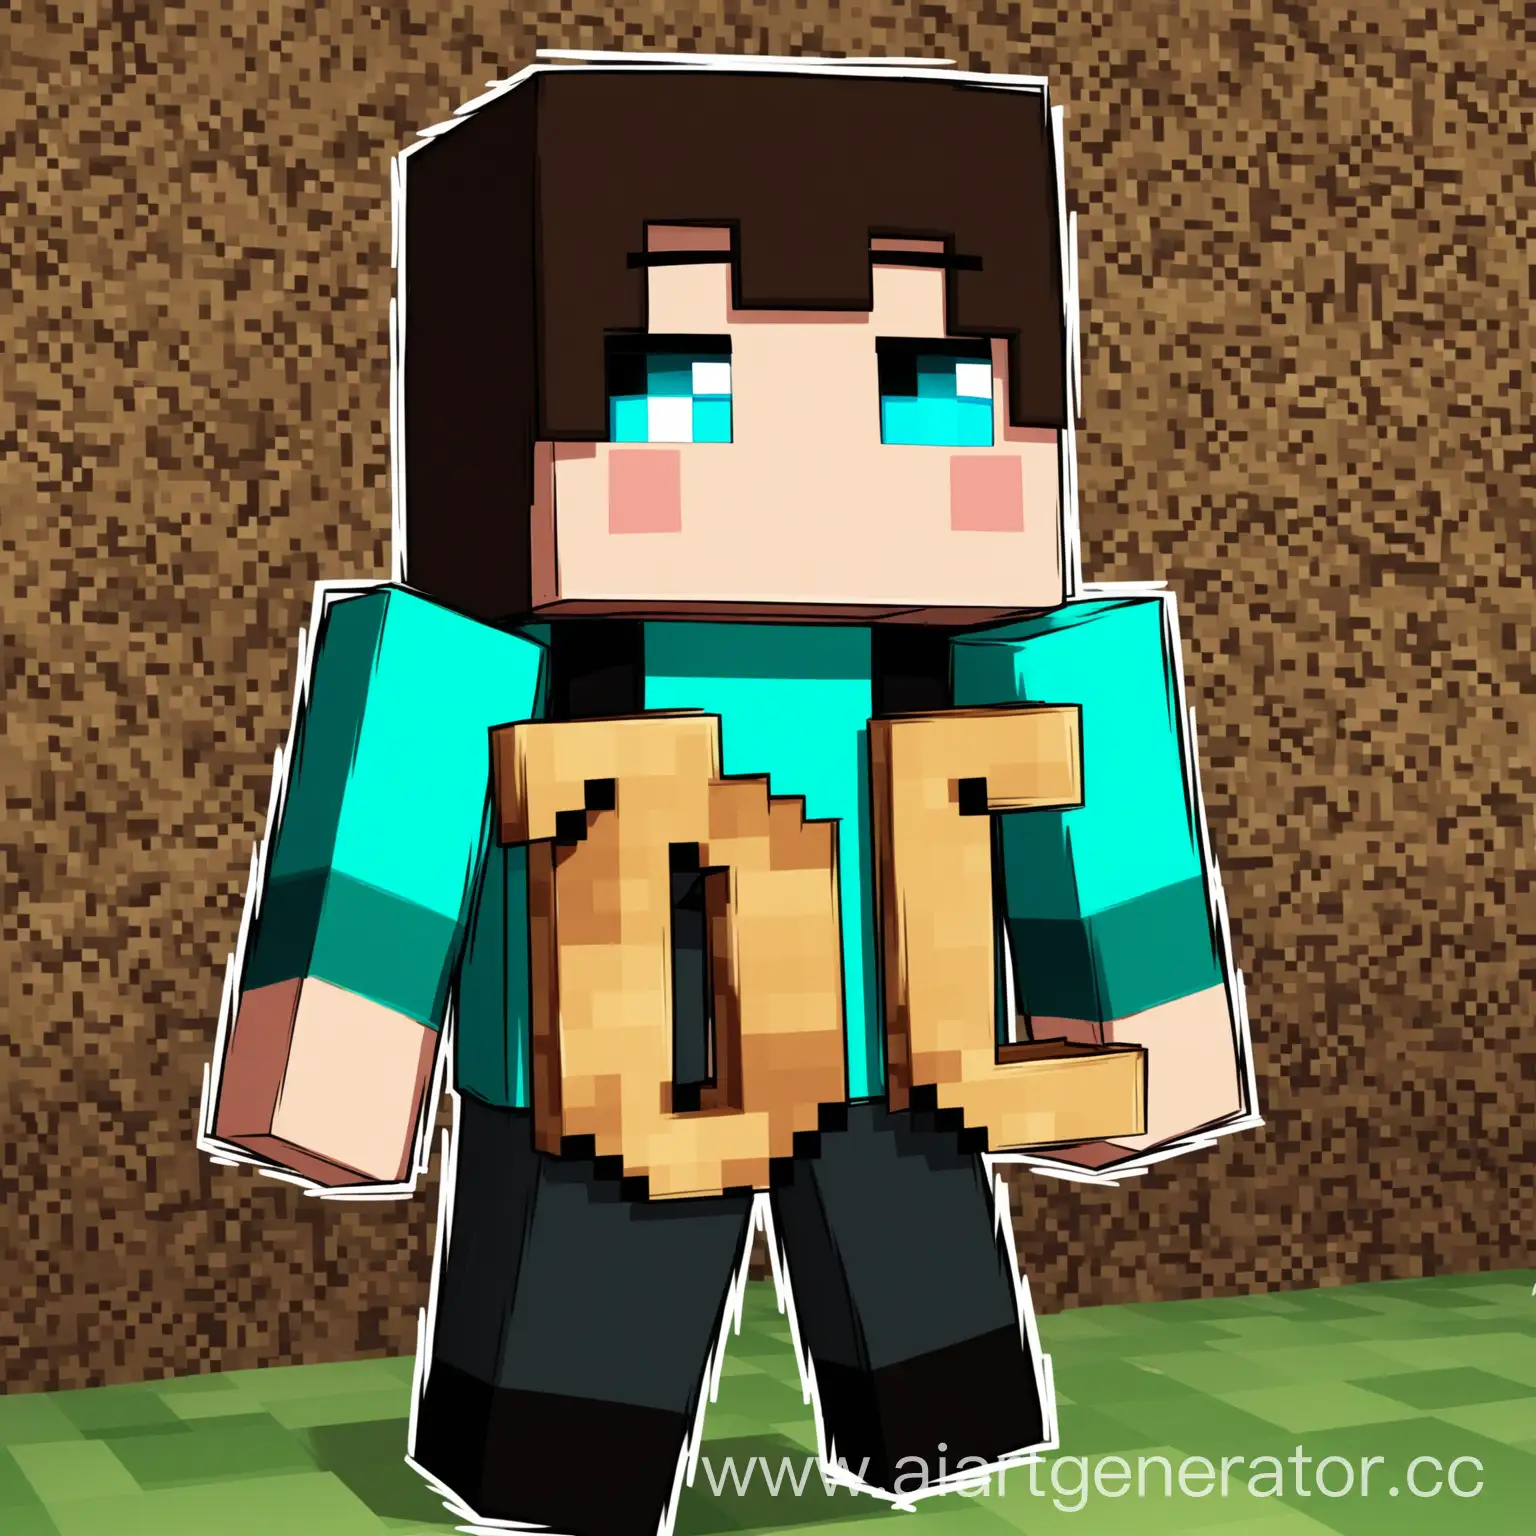 Custom-Minecraft-Server-Avatar-Letters-Q-and-C-in-Blocky-Style